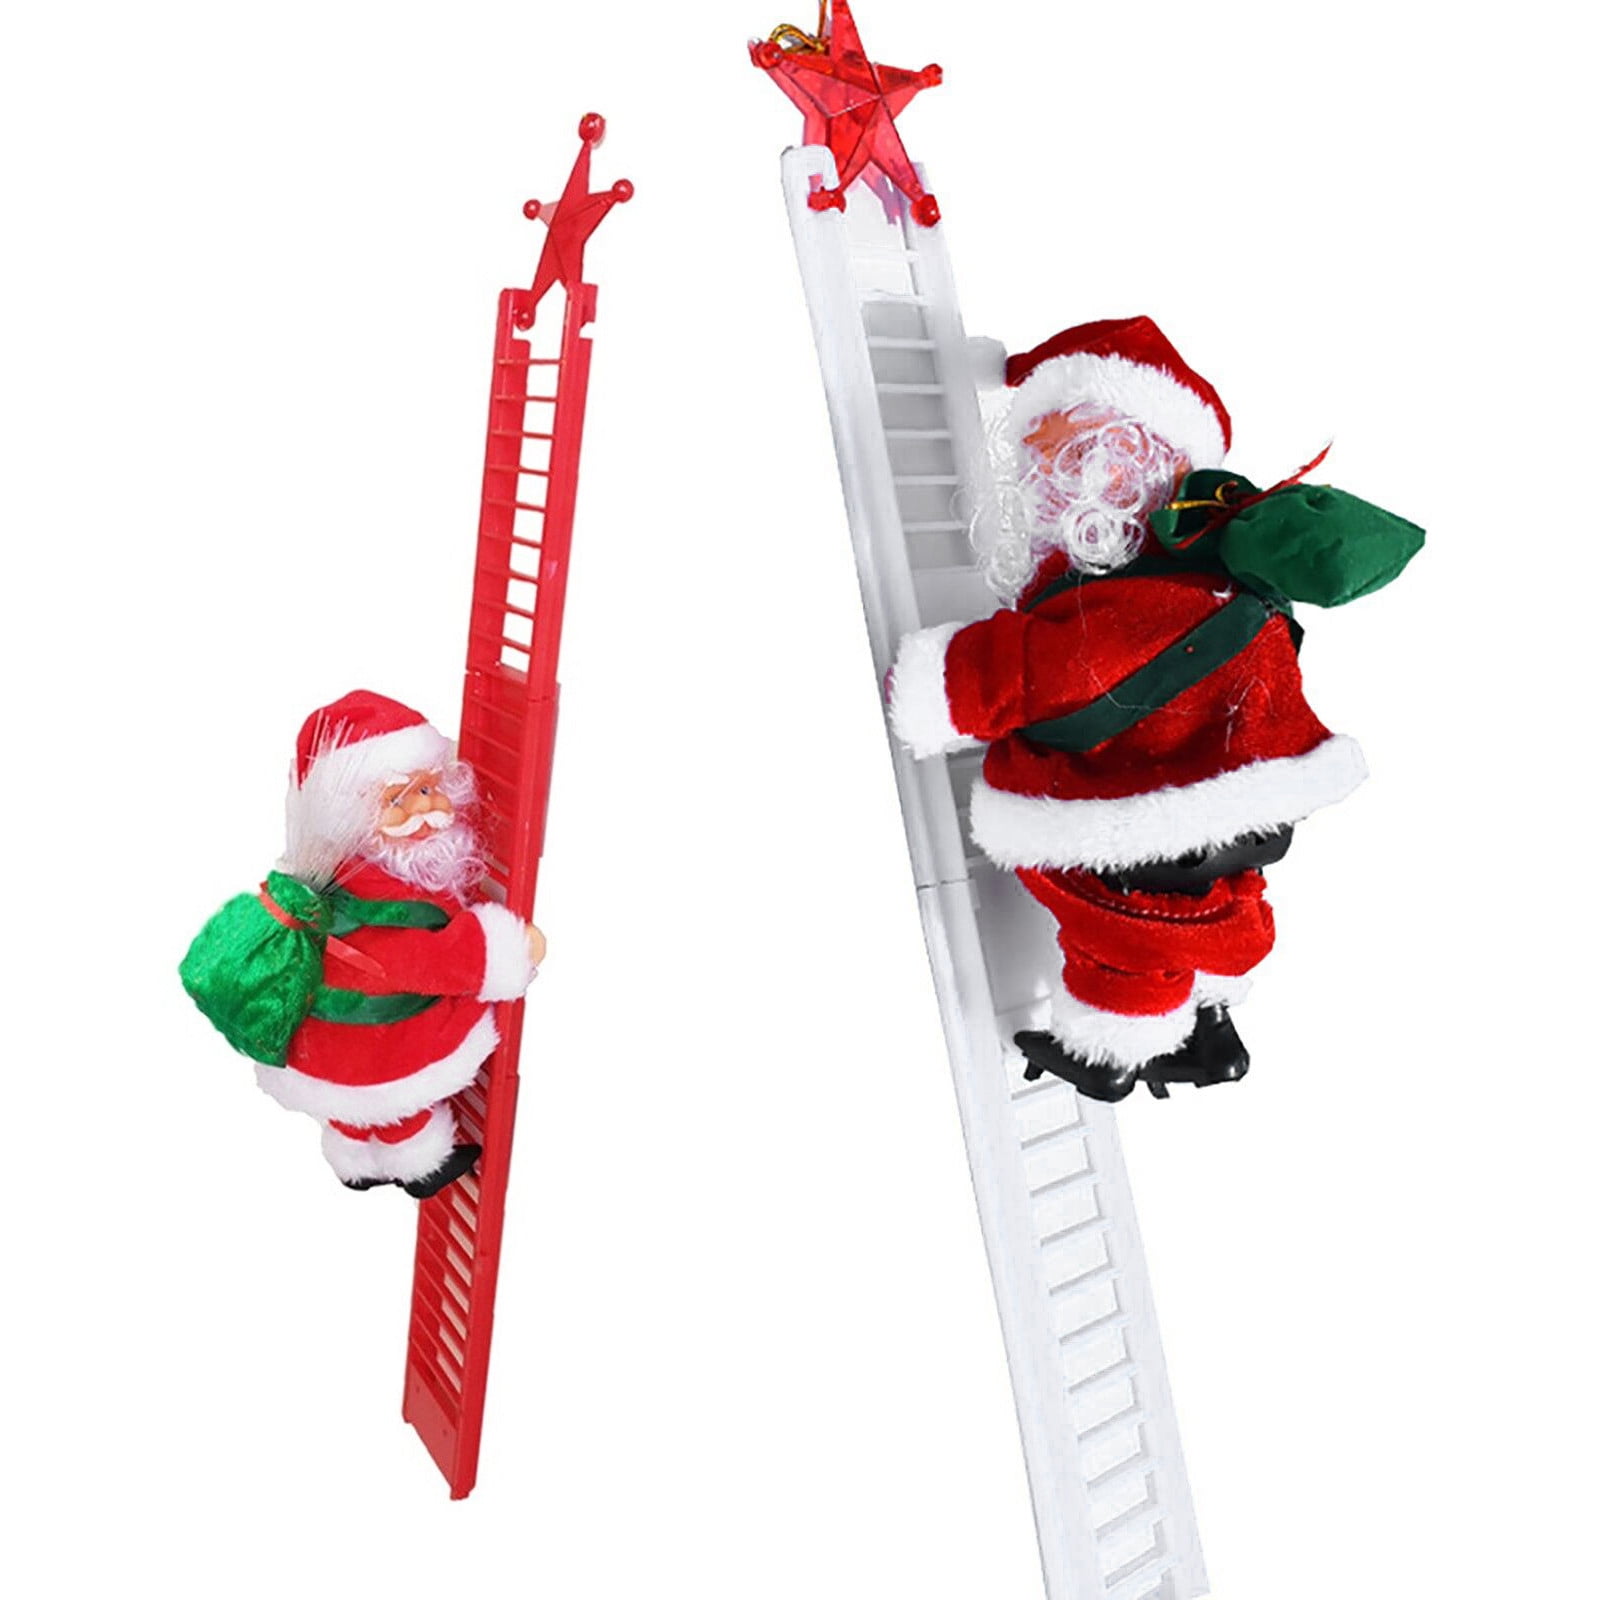 Details about   Christmas Electric Musical Dolls Singing Santa Xmas Ornament Decoration Kids Toy 